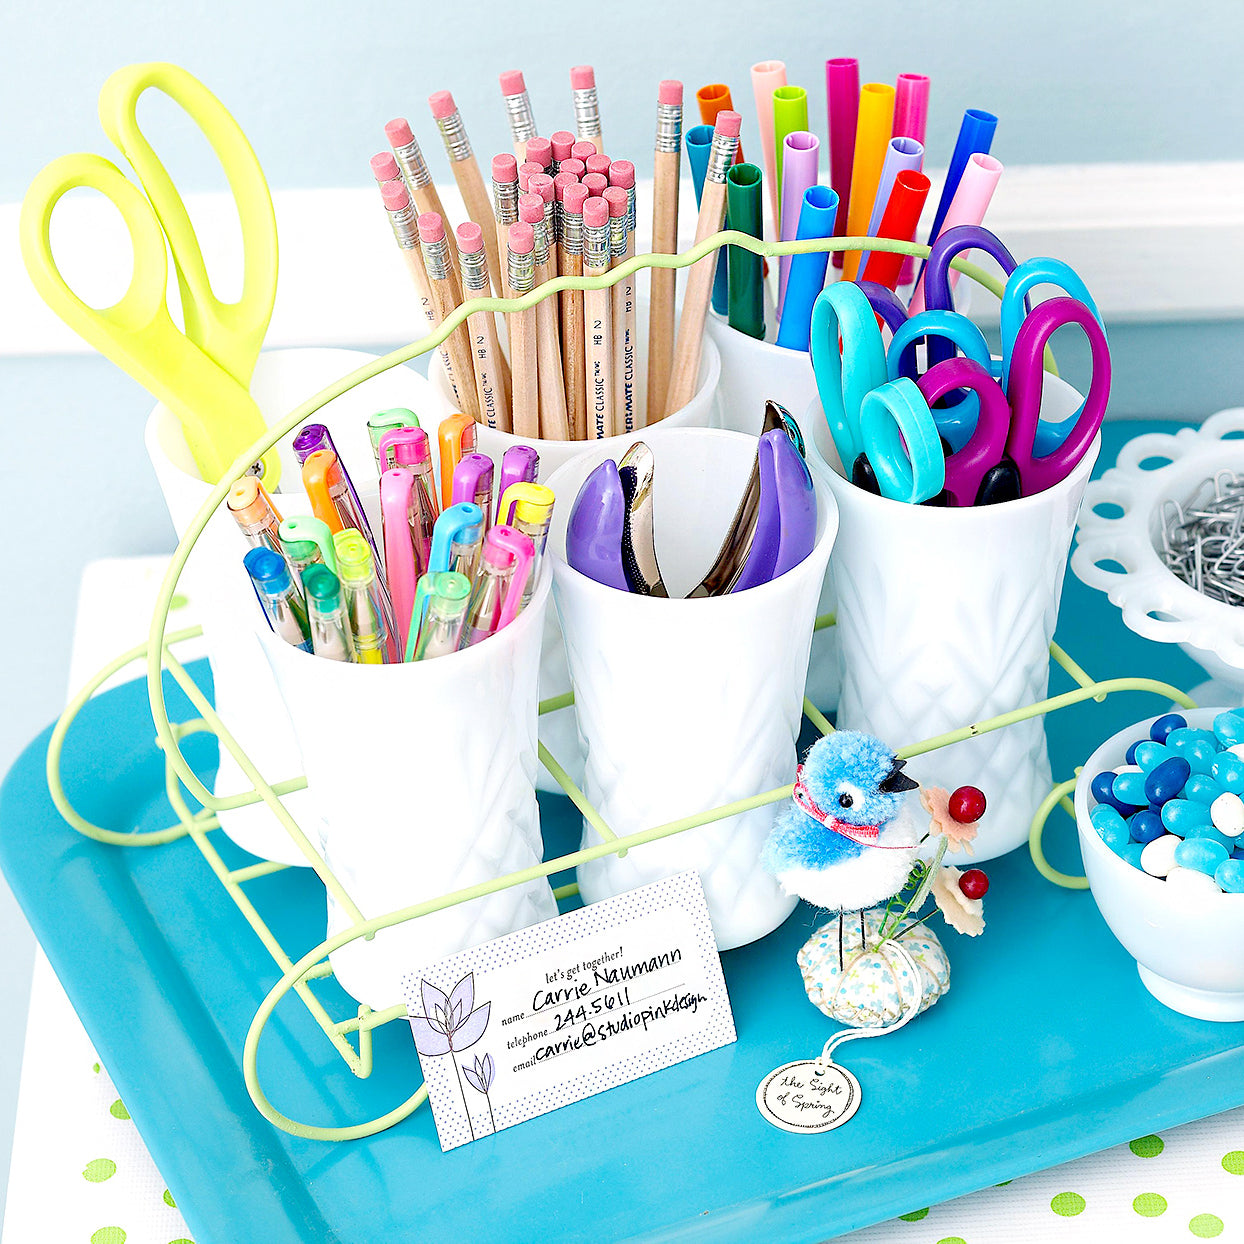 Tools every crafter should have!